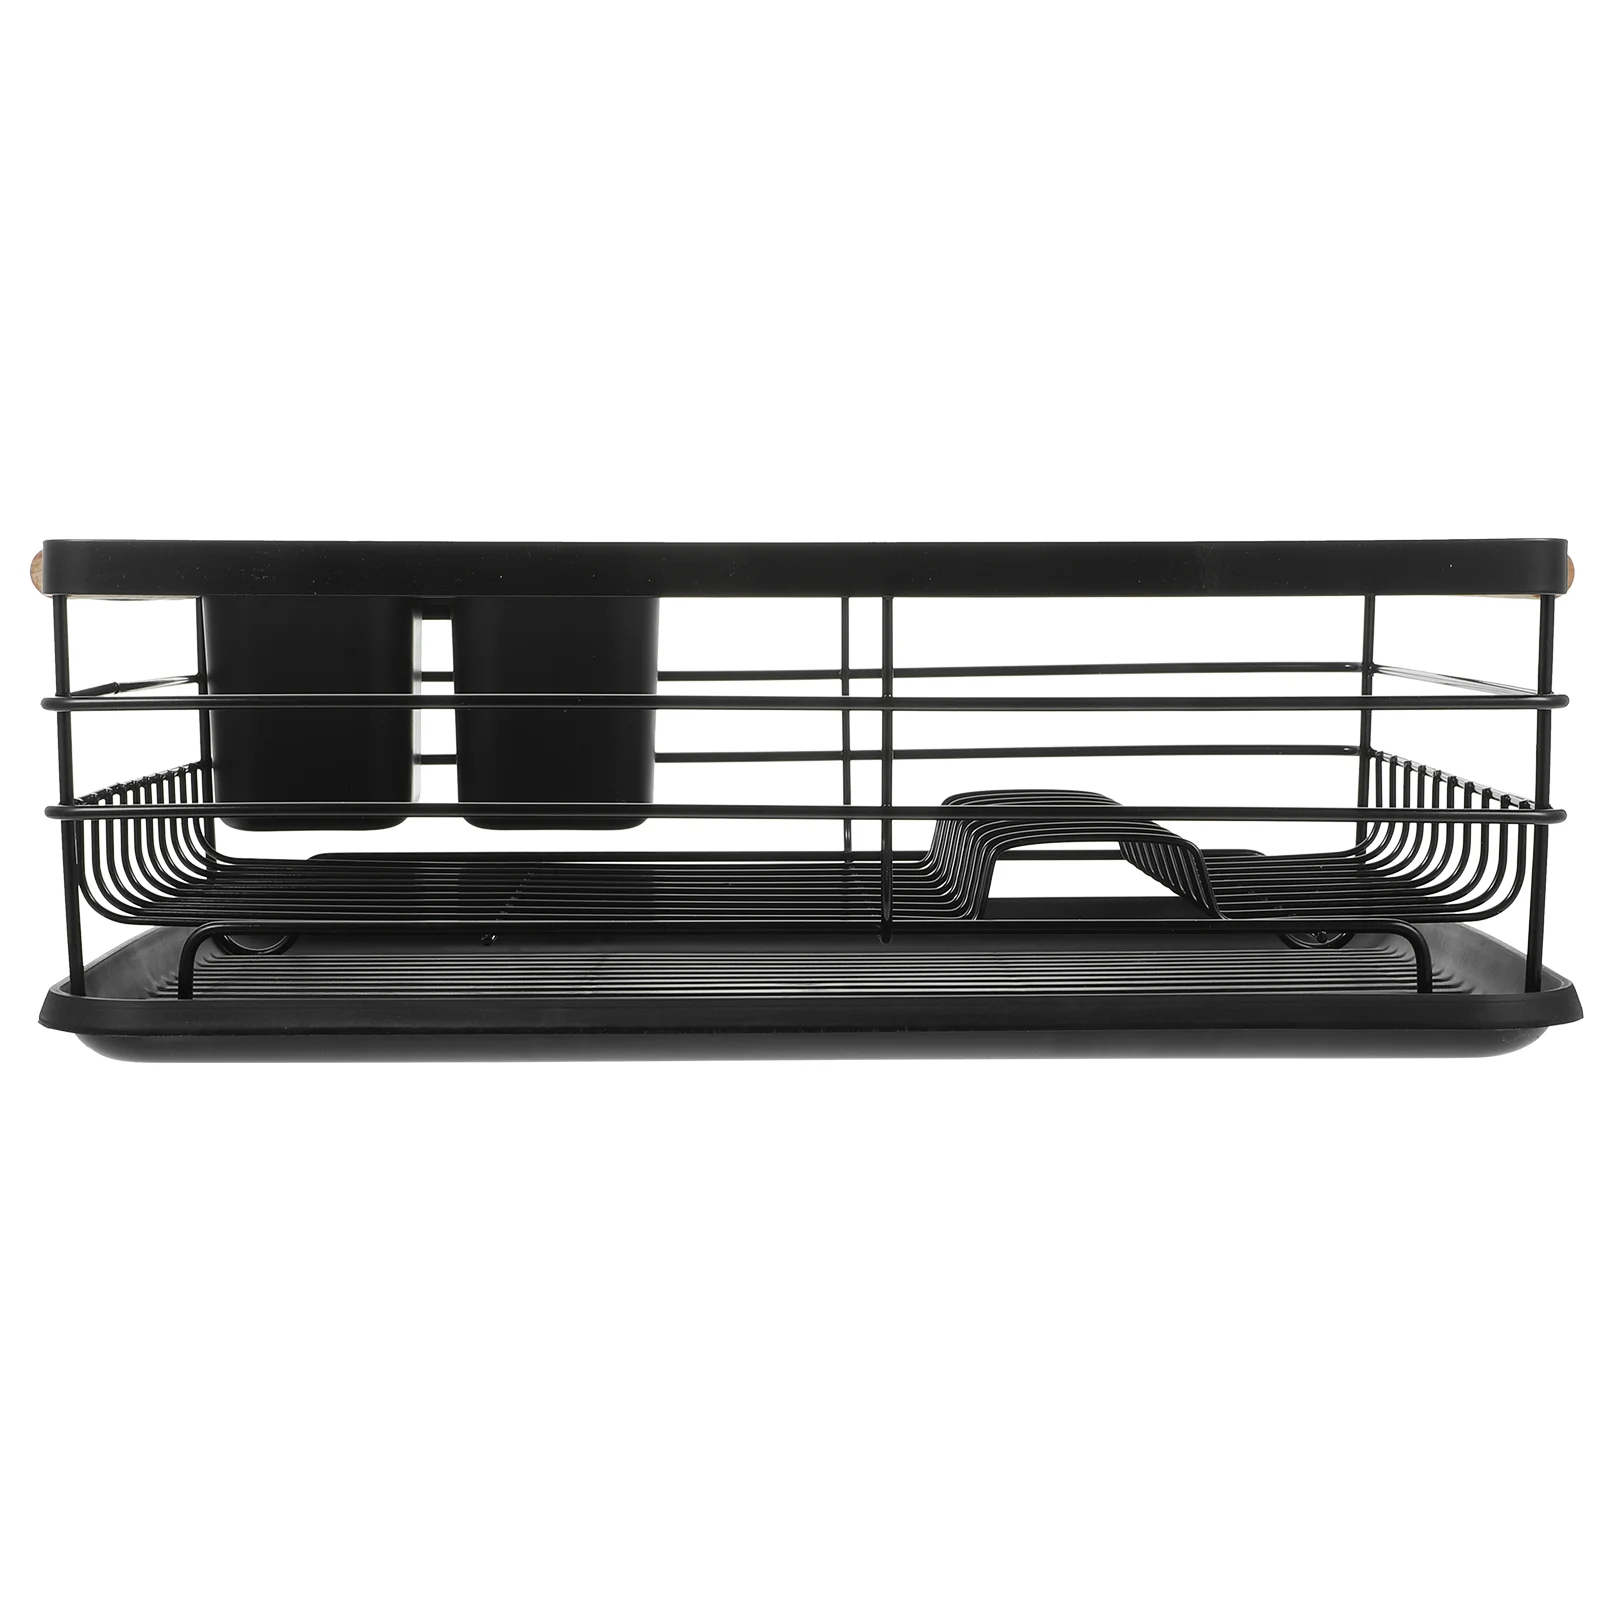 

Clothes Drying Rack Dish Racks Dishes Drainer Kitchen Sink Plate Metal Strainers Counter Dishwasher